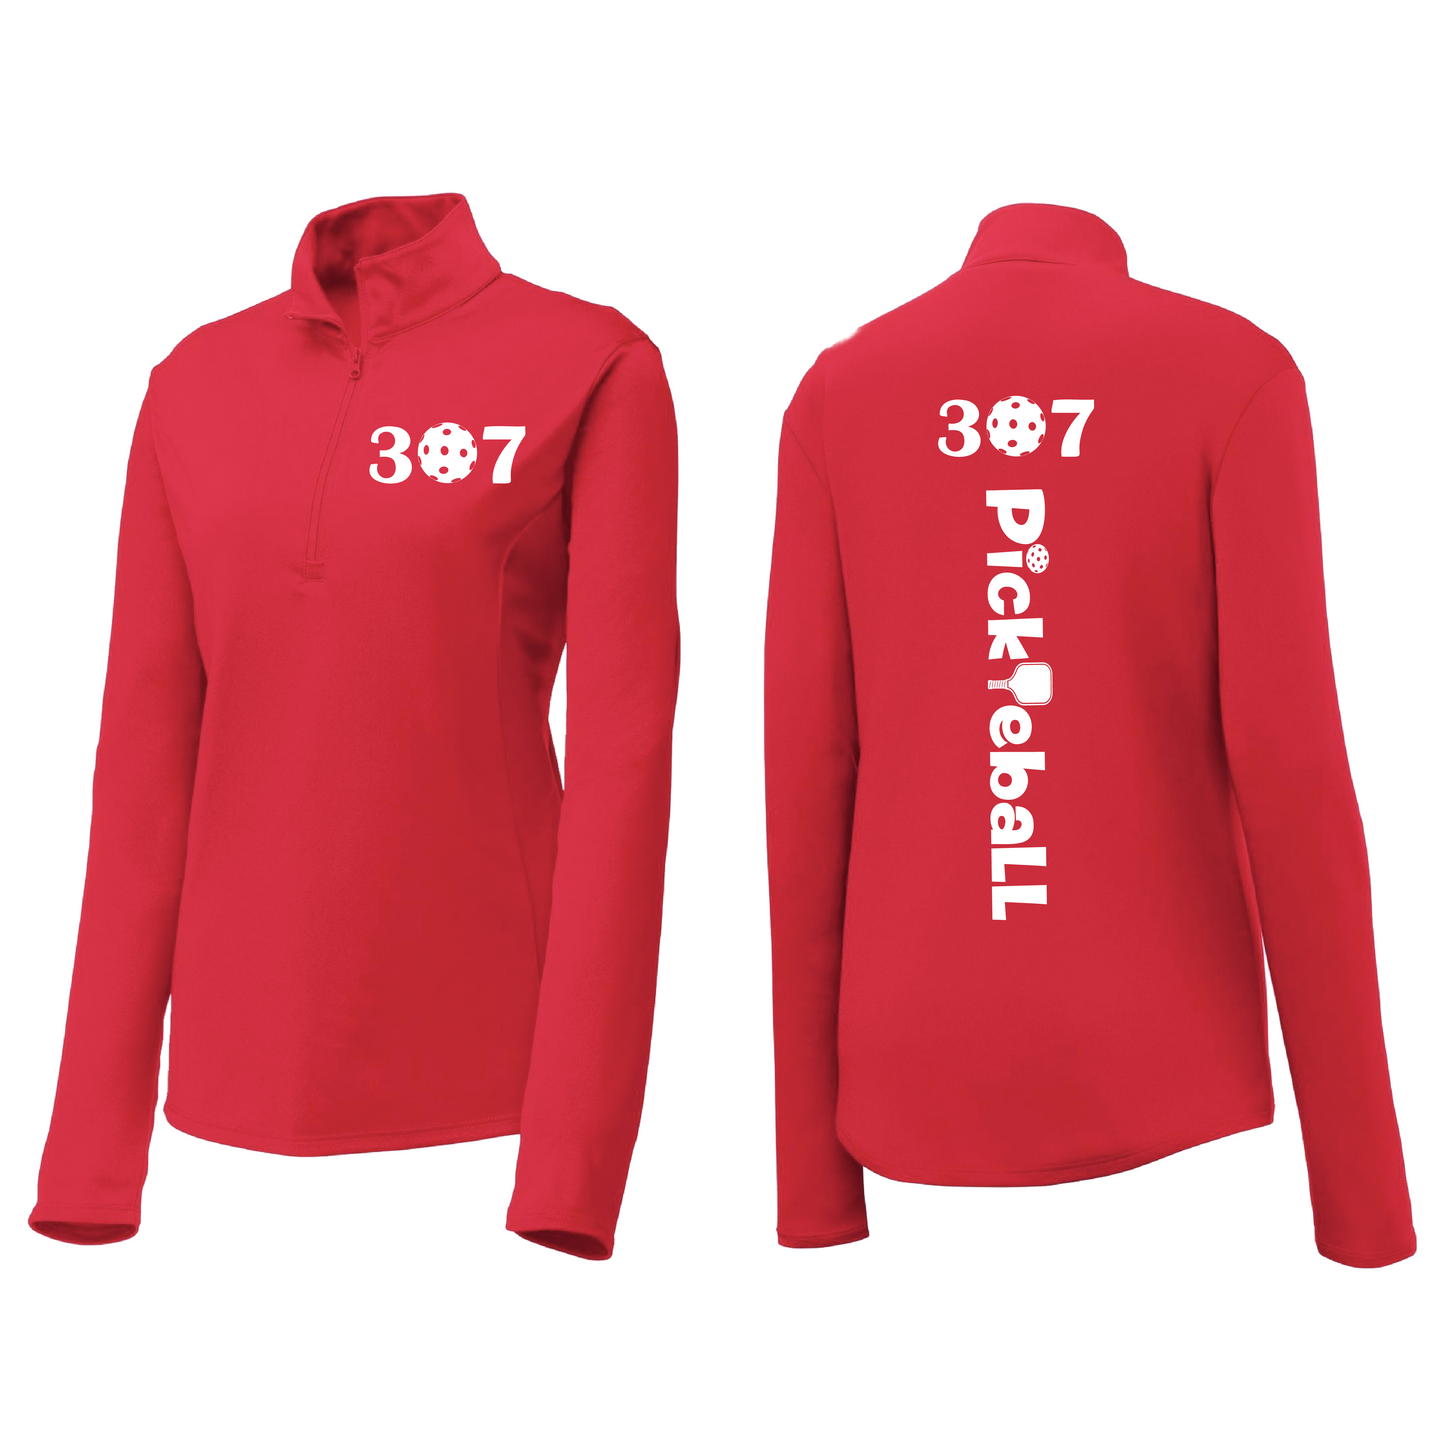 307 Wyoming Pickleball Club | Women’s 1/4 Zip Athletic Pullover Shirt | 100% Polyester